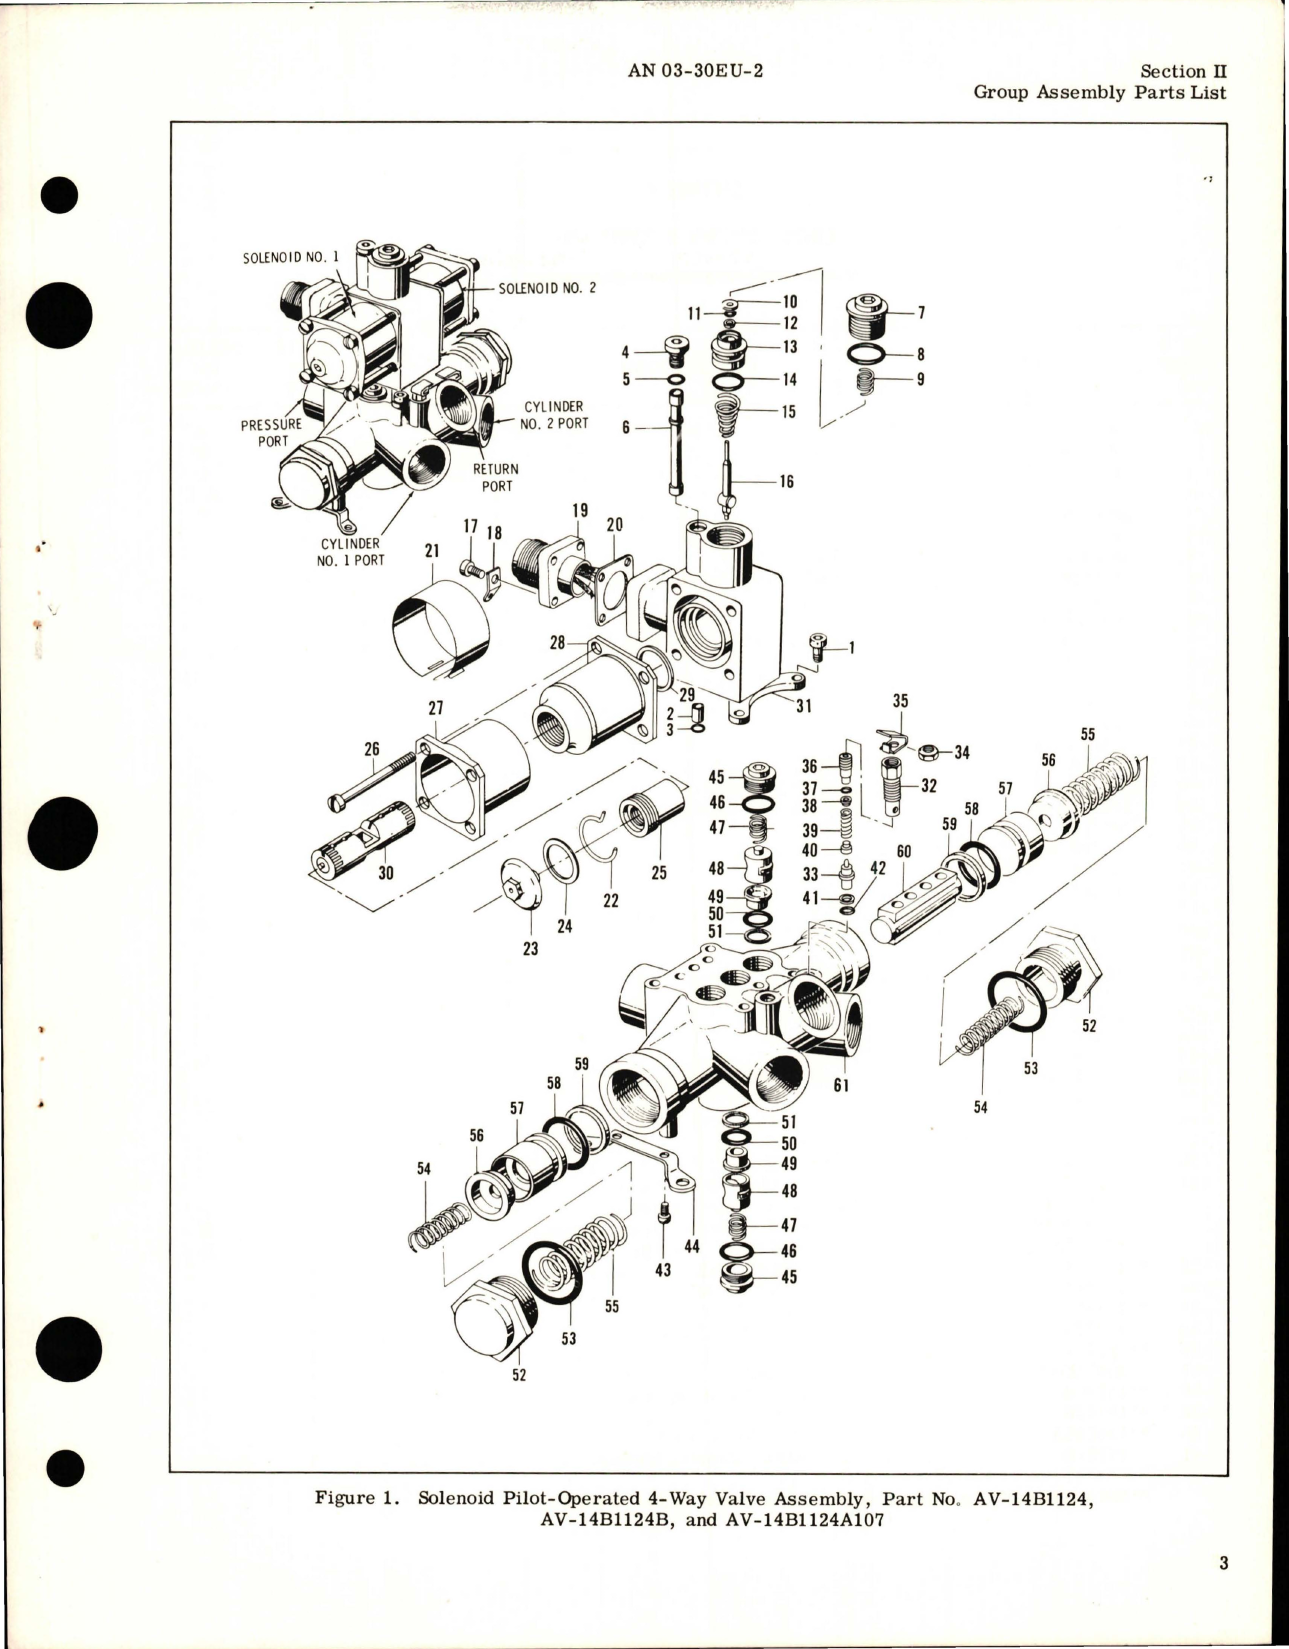 Sample page 5 from AirCorps Library document: Illustrated Parts Breakdown for Solenoid Pilot-Operated 4-Way 3-Position Selector Valve 